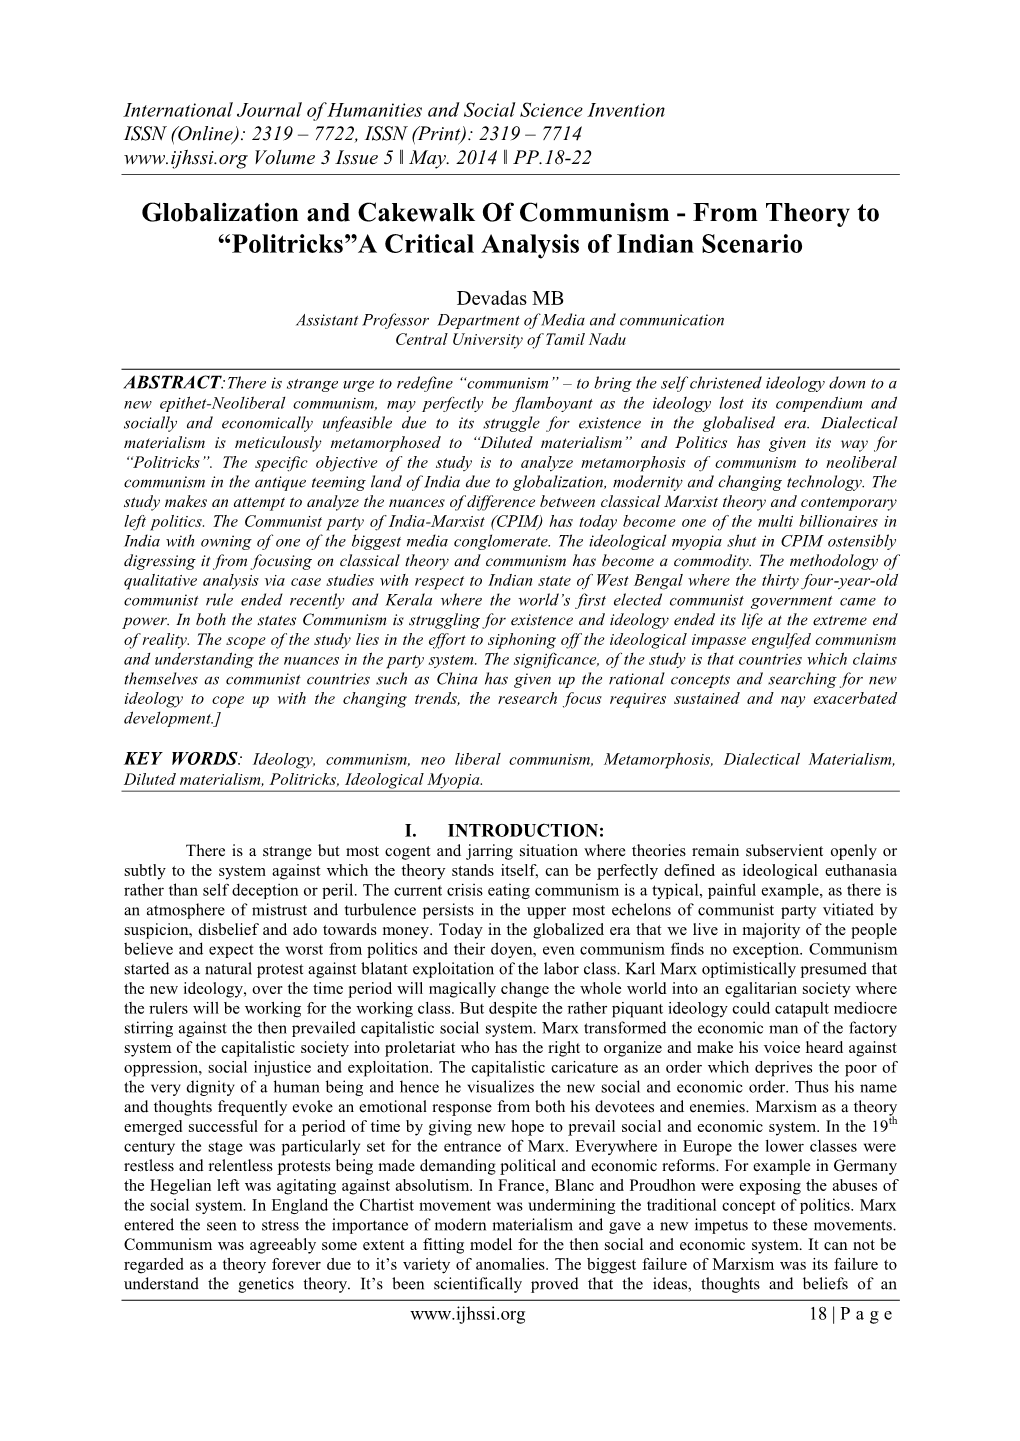 Globalization and Cakewalk of Communism - from Theory to “Politricks”A Critical Analysis of Indian Scenario